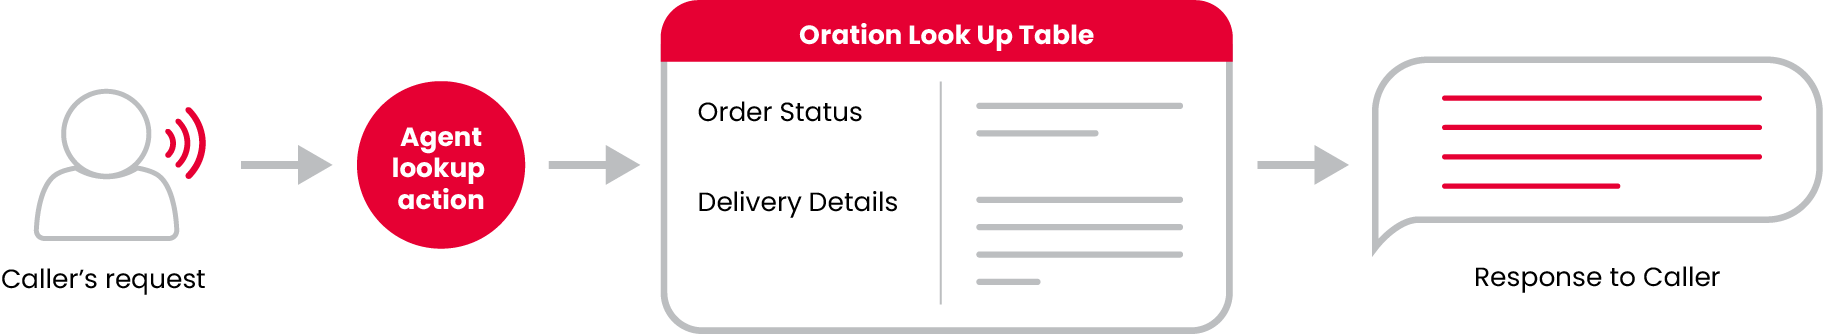 Look Up Table Diagram